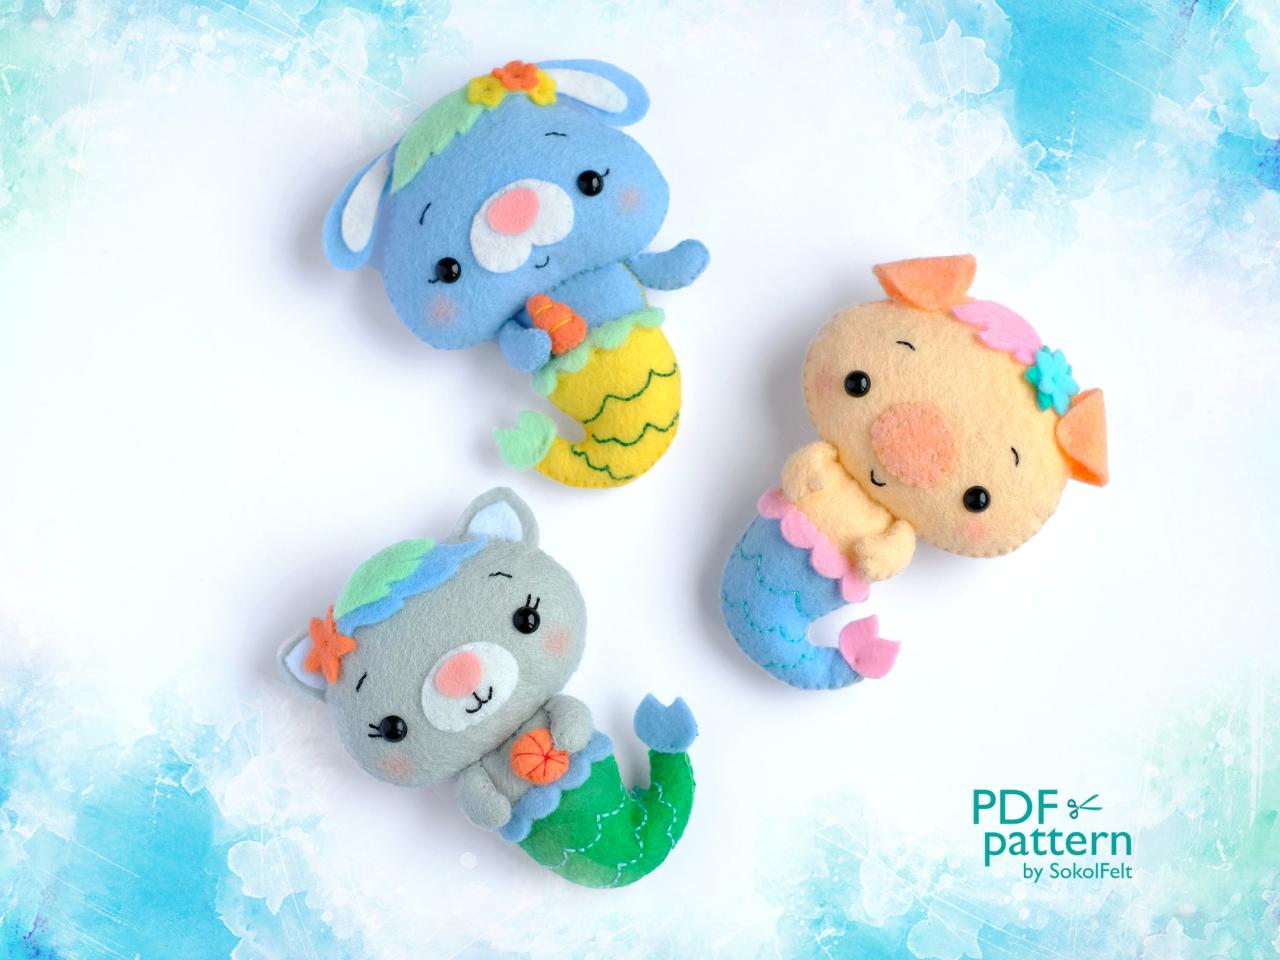 Cute Animal Mermaids Felt Toy Pdf And Svg Patterns, Bunny, Pig And Cat, Sea Life Digital Sewing Tutorial, Under The Sea Felt Baby Mobile